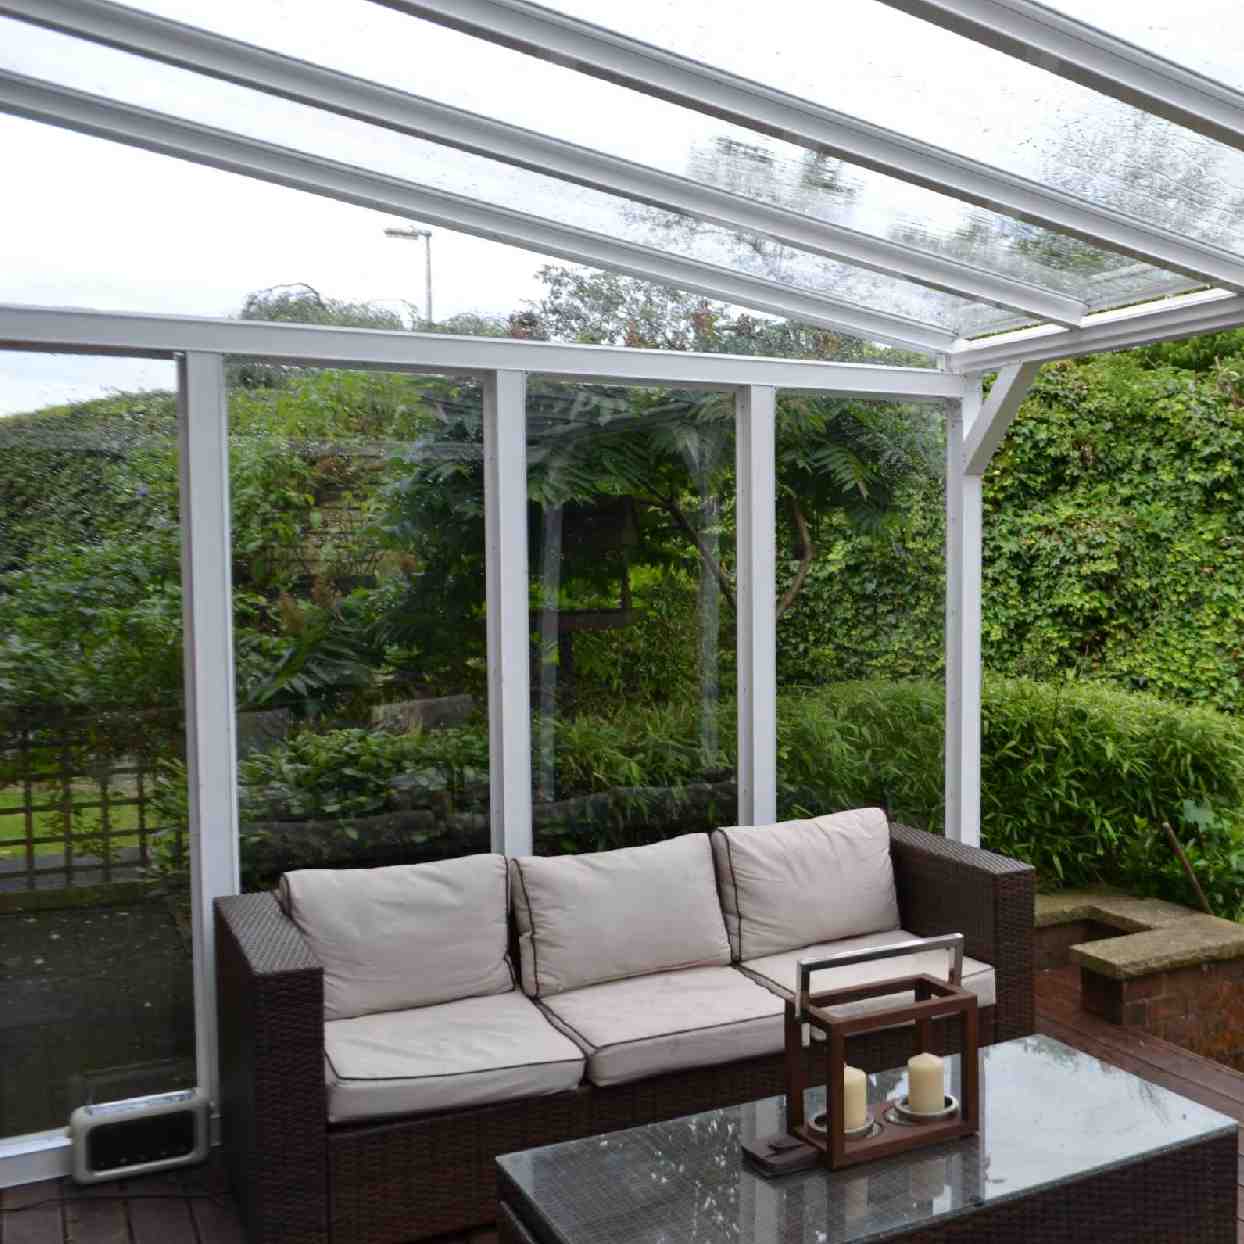 Buy Omega Verandah White with 6mm Glass Clear Plate Polycarbonate Glazing - 6.3m (W) x 2.0m (P), (4) Supporting Posts online today